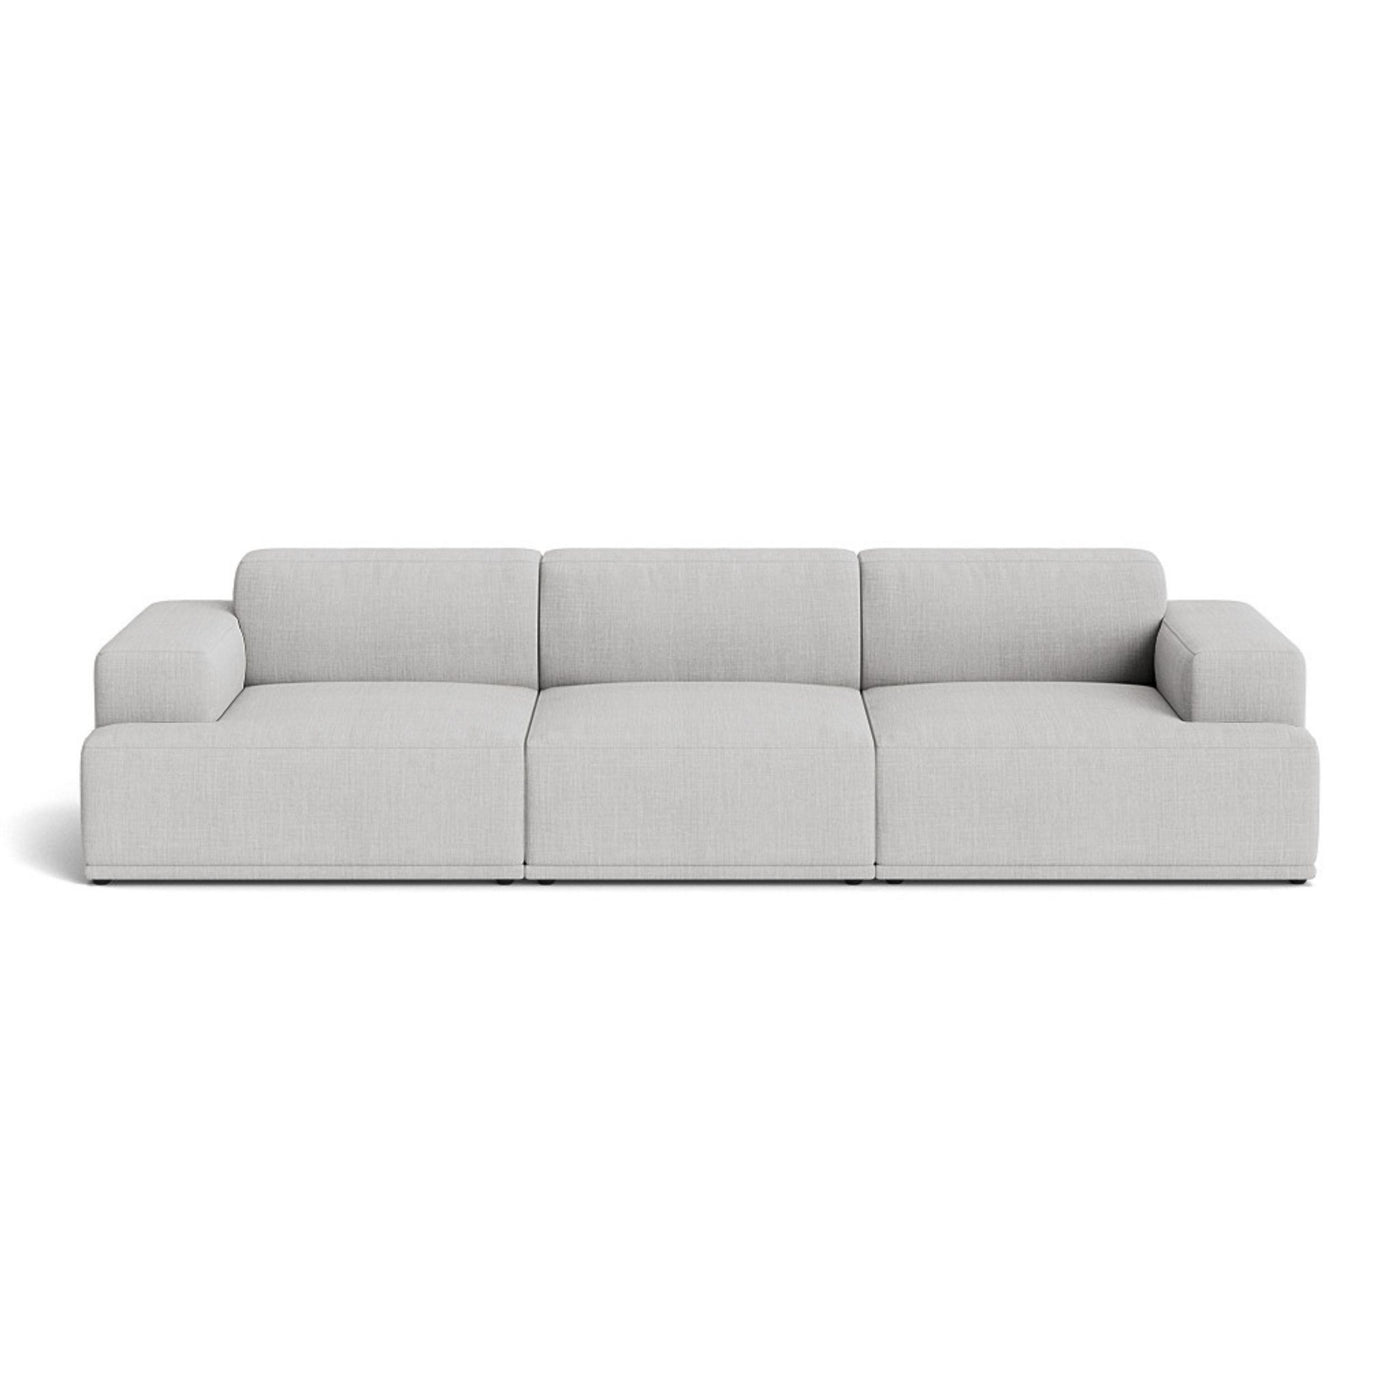 Muuto Connect Soft Modular 3 Seater Sofa, configuration 1. Made-to-order from someday designs. #colour_remix-123